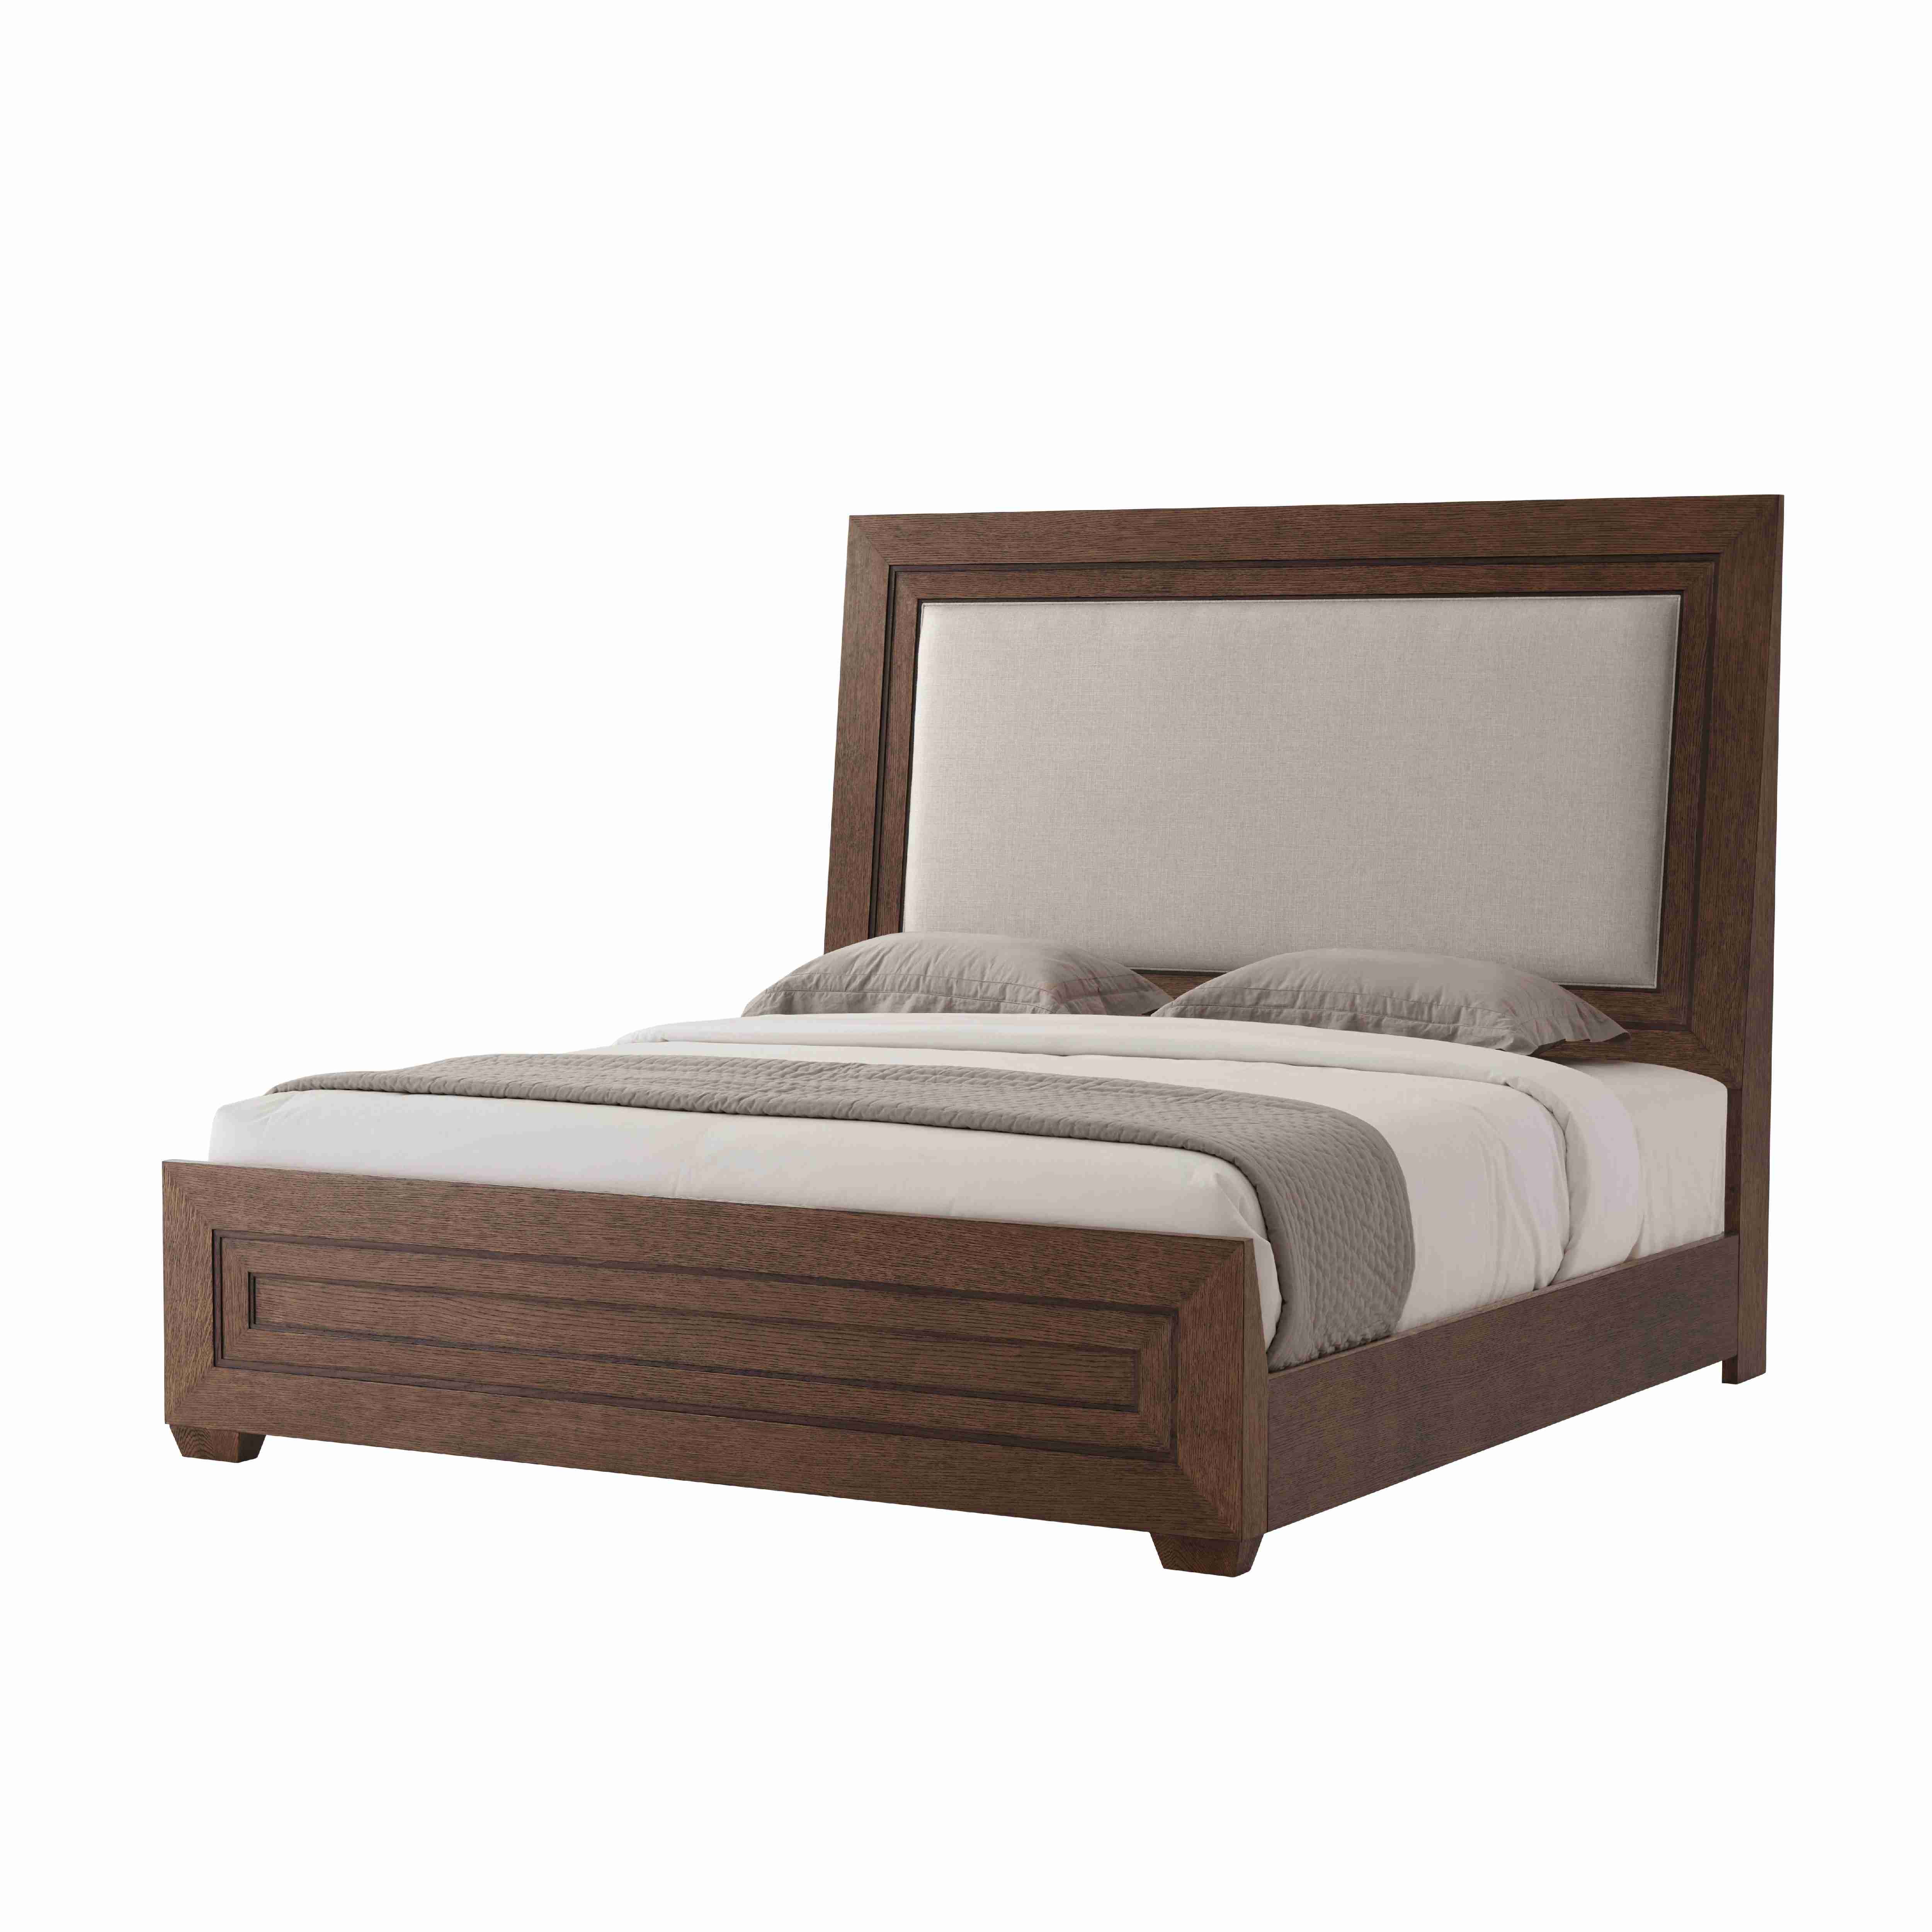 LAURO US KING BED